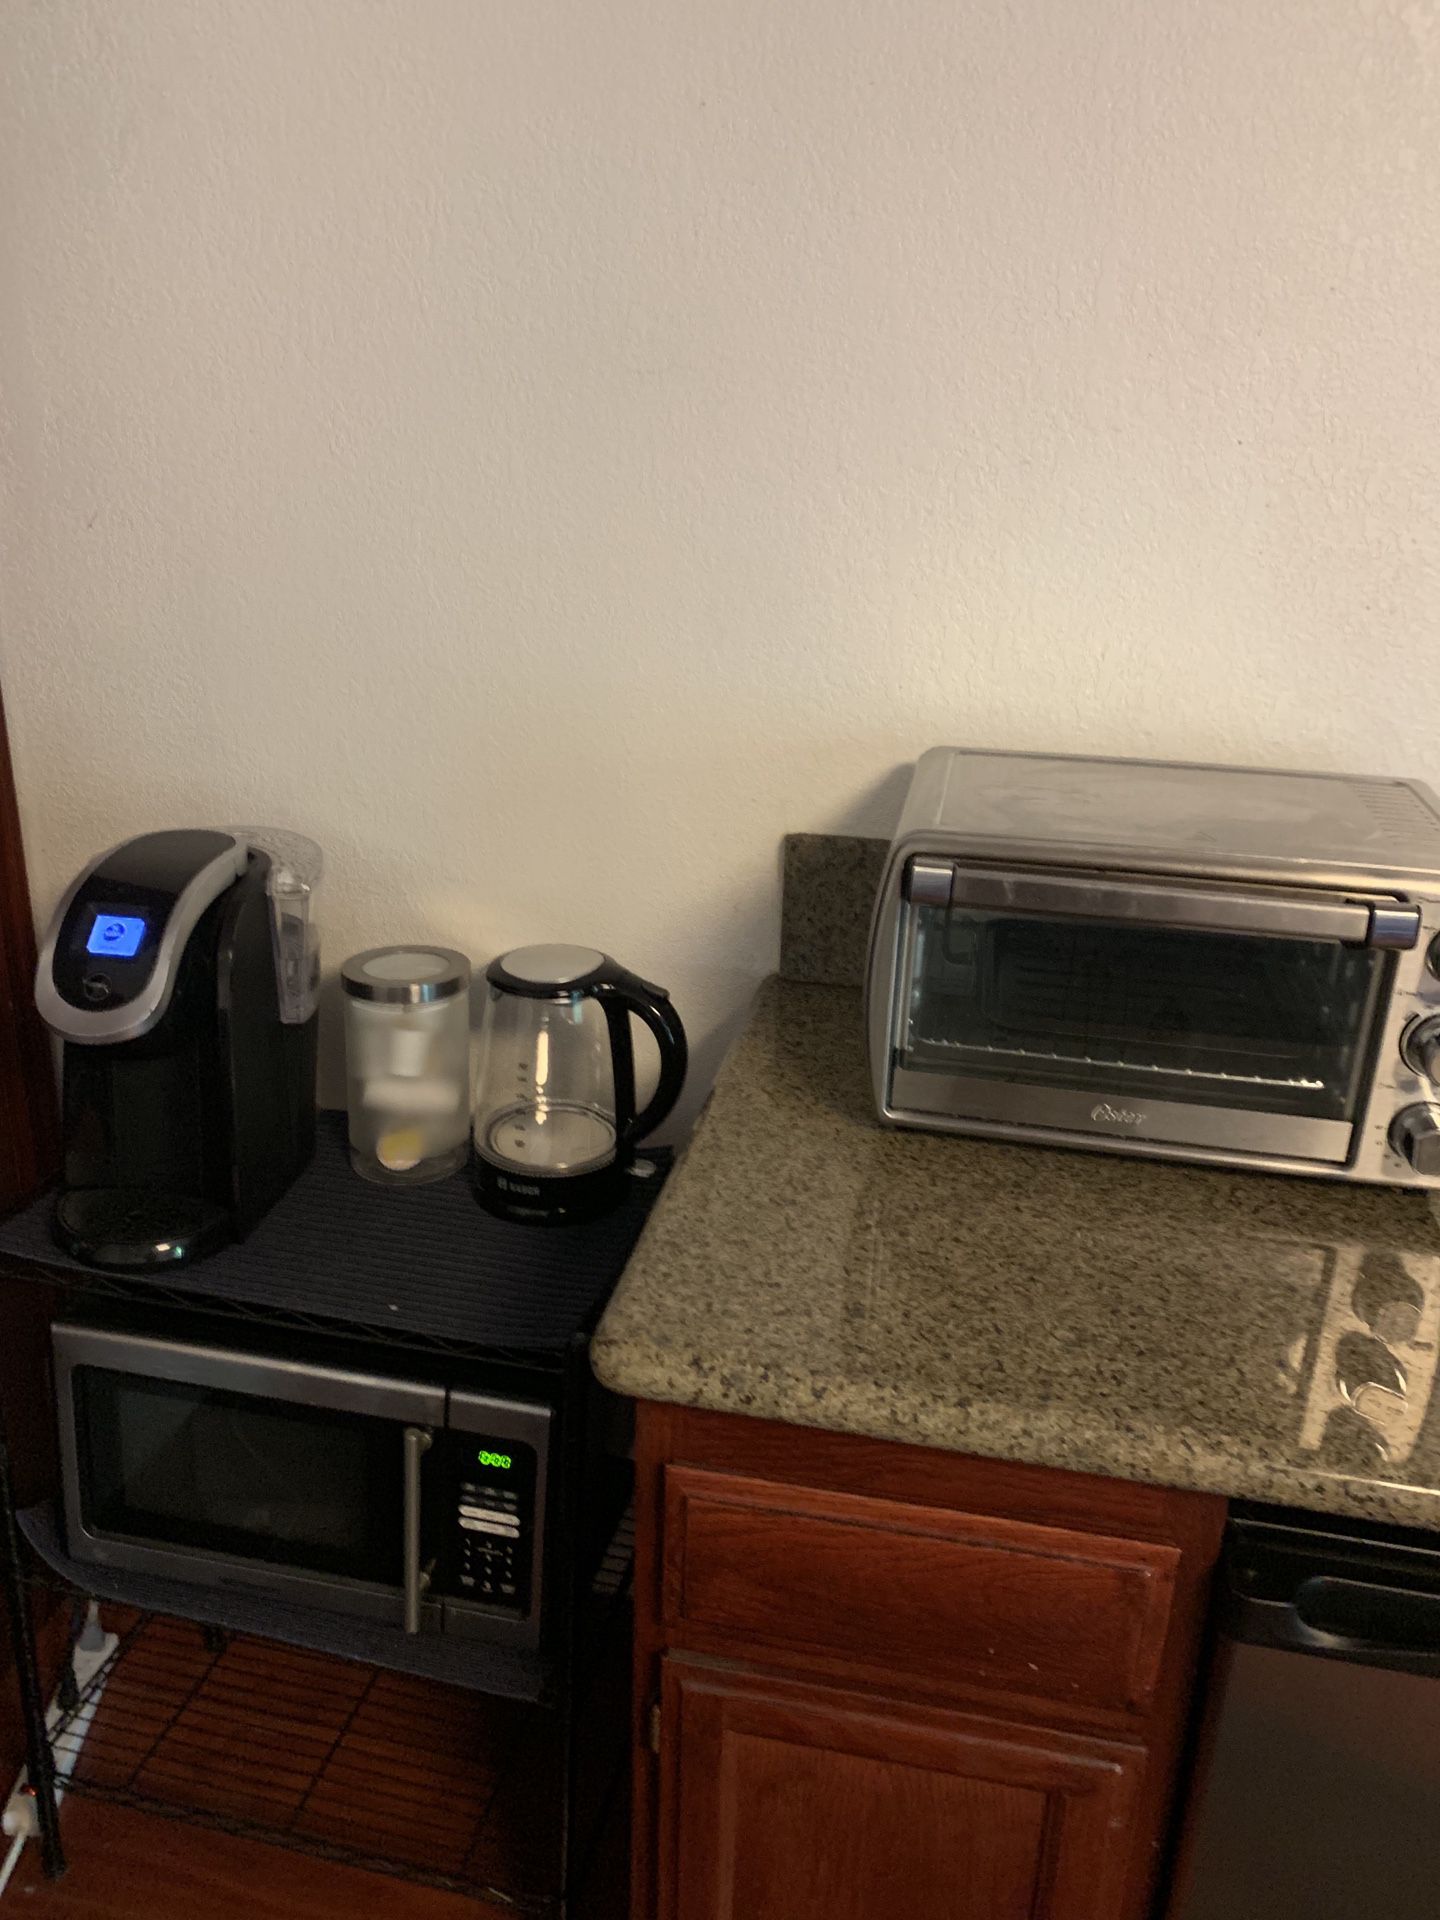 Keurig coffee maker, toaster oven, microwave and electric tea kettle